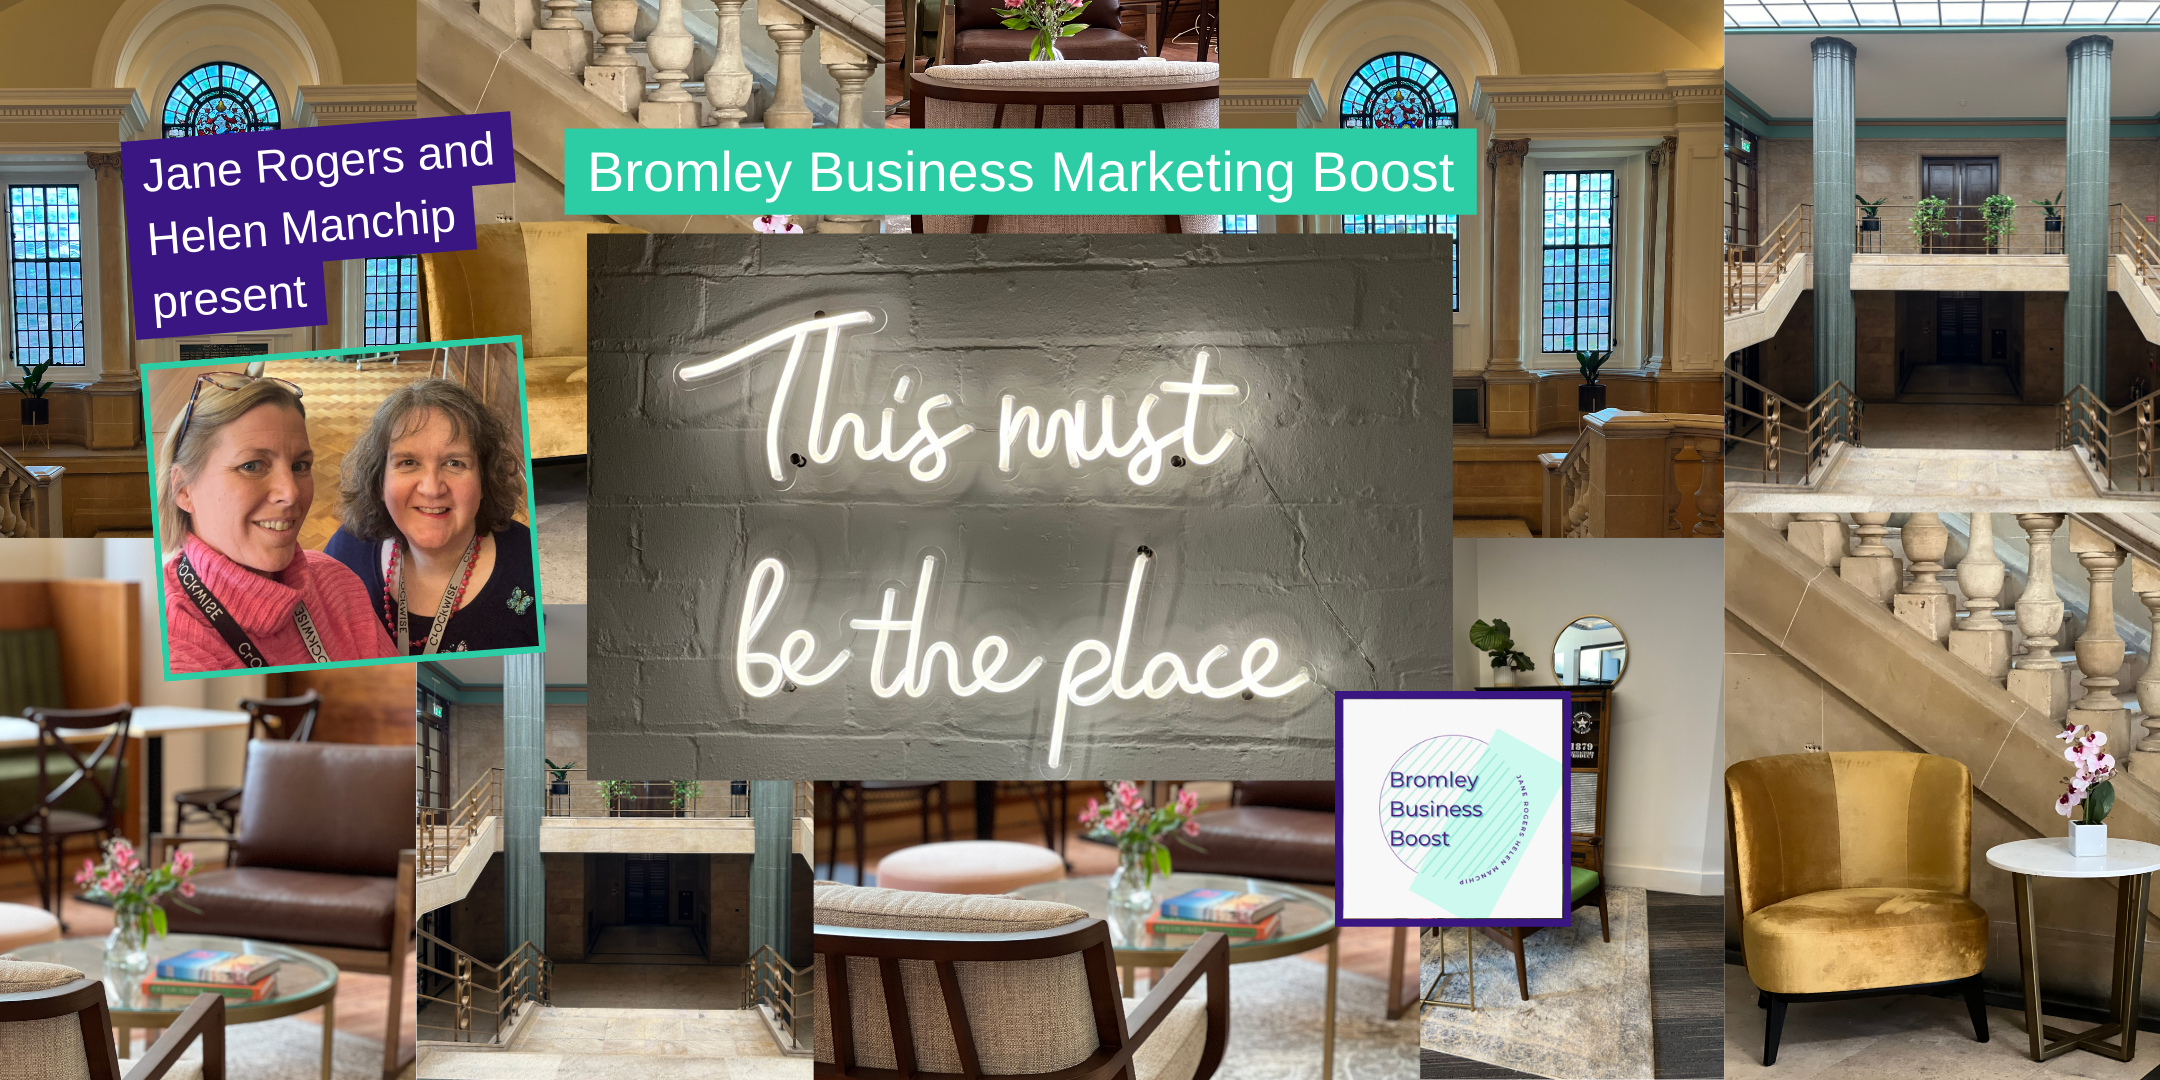 Bromley Business Marketing Boost